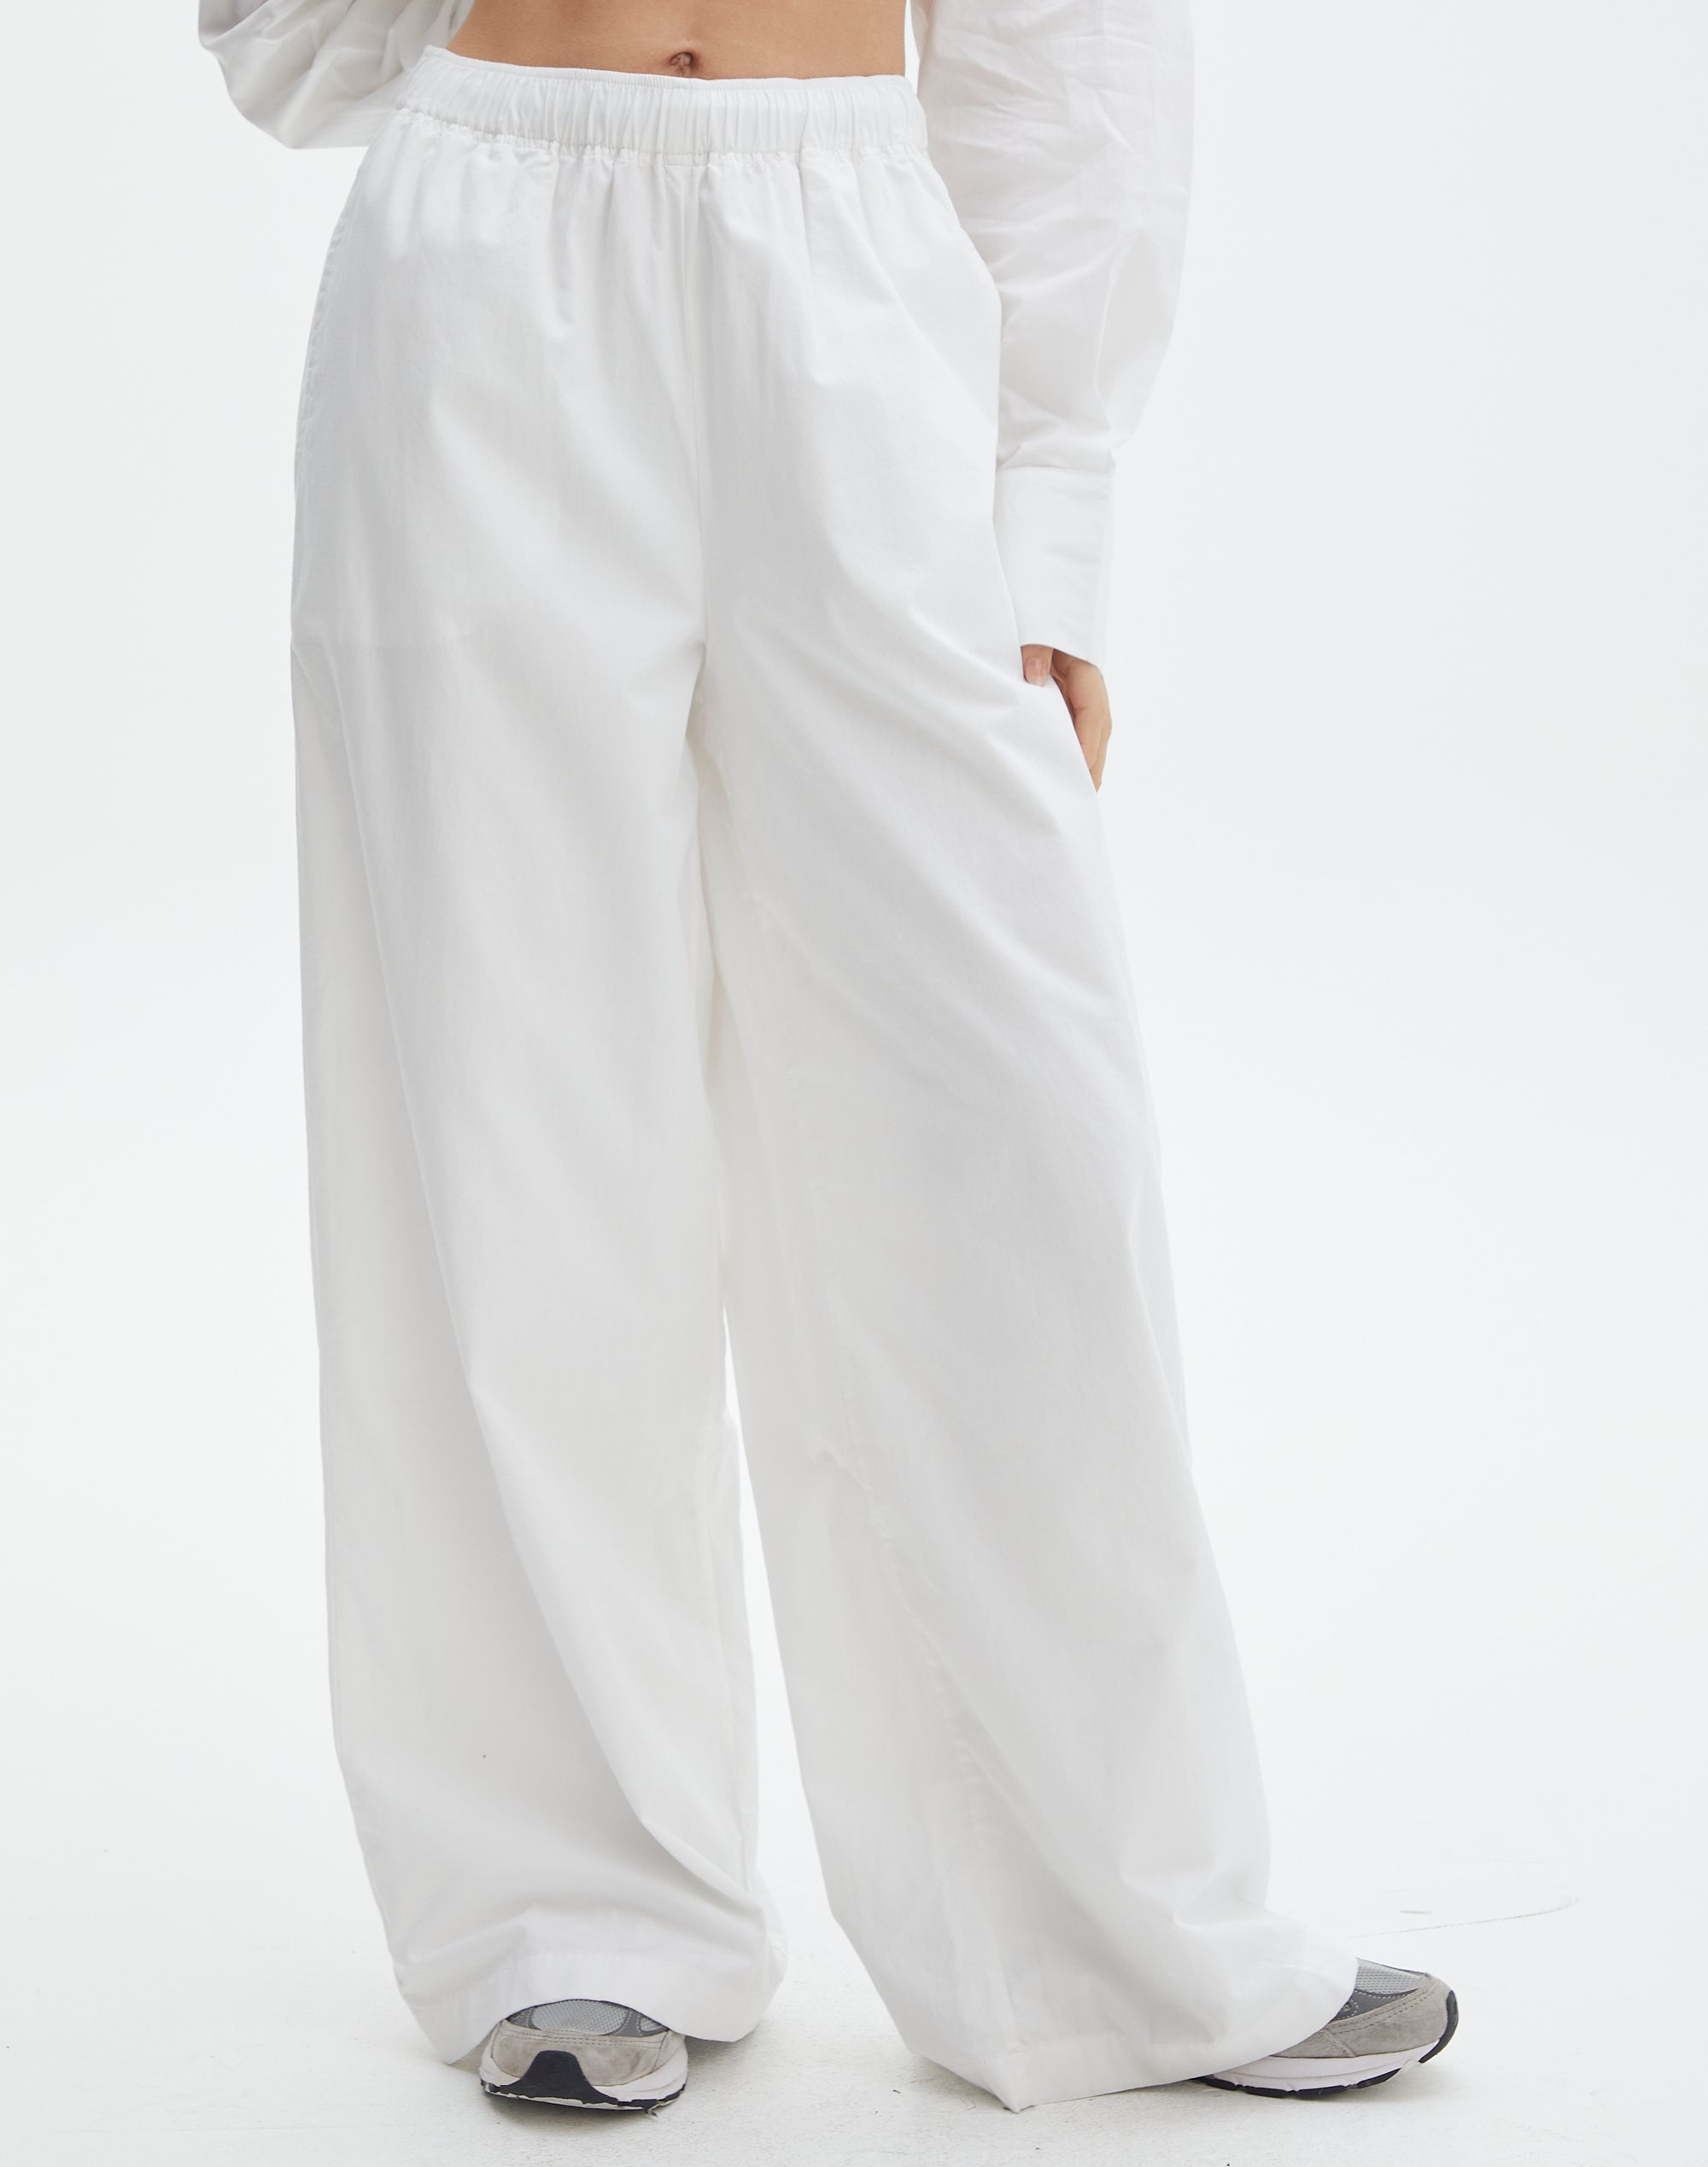 Buy White Wide Bottom Flare Pants Online | The Label Life